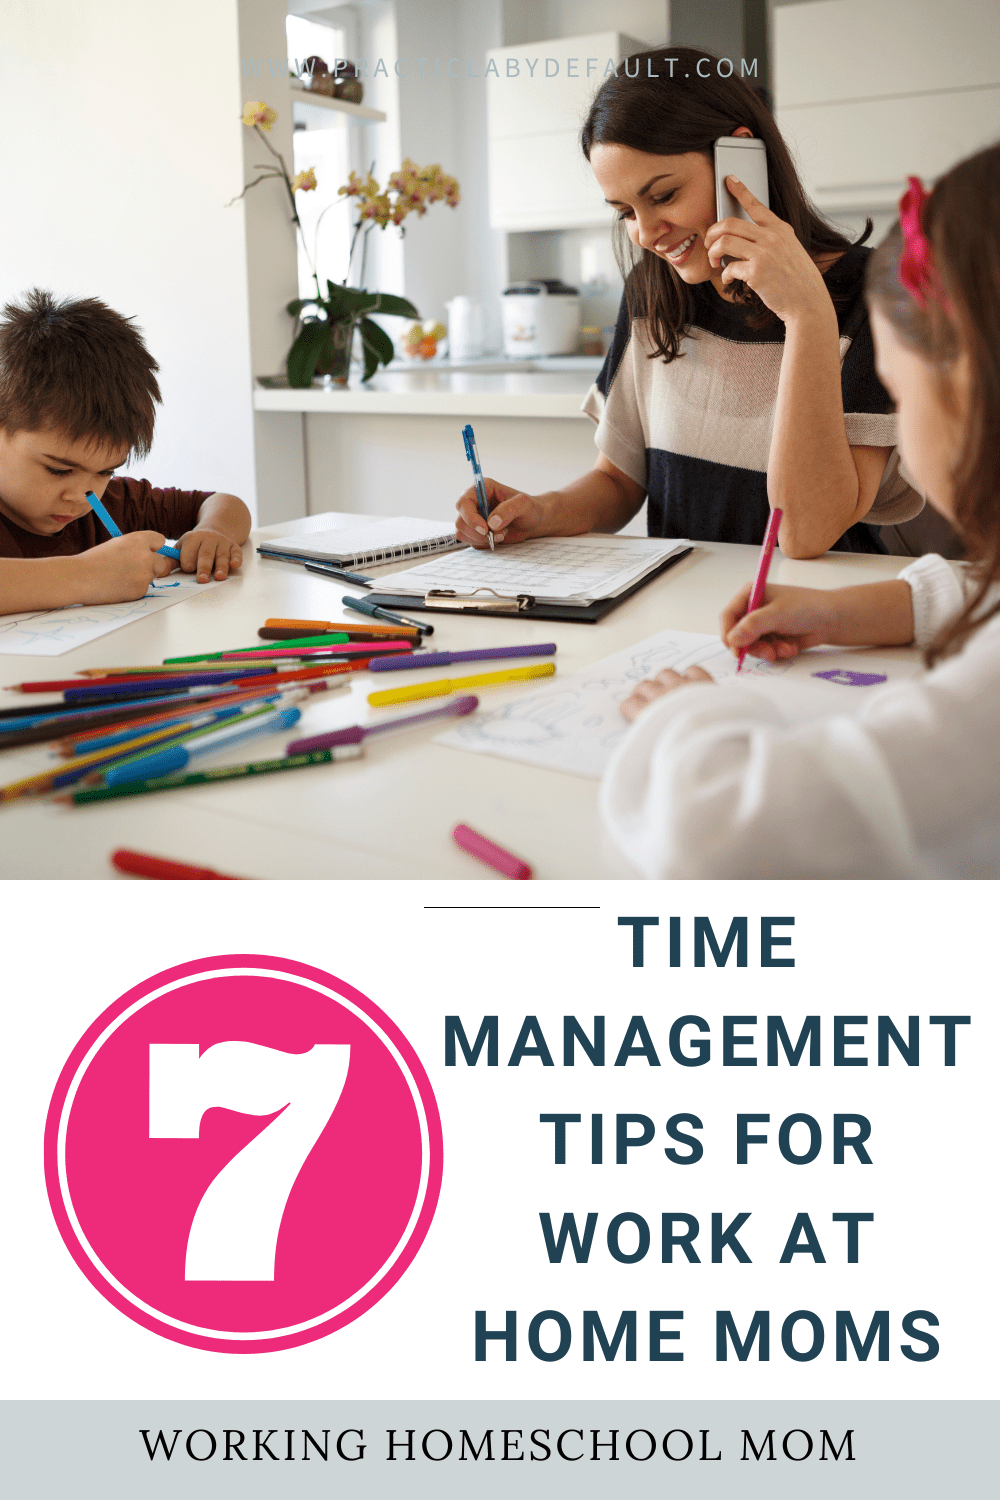 Time Management Tips For Work At Home Moms